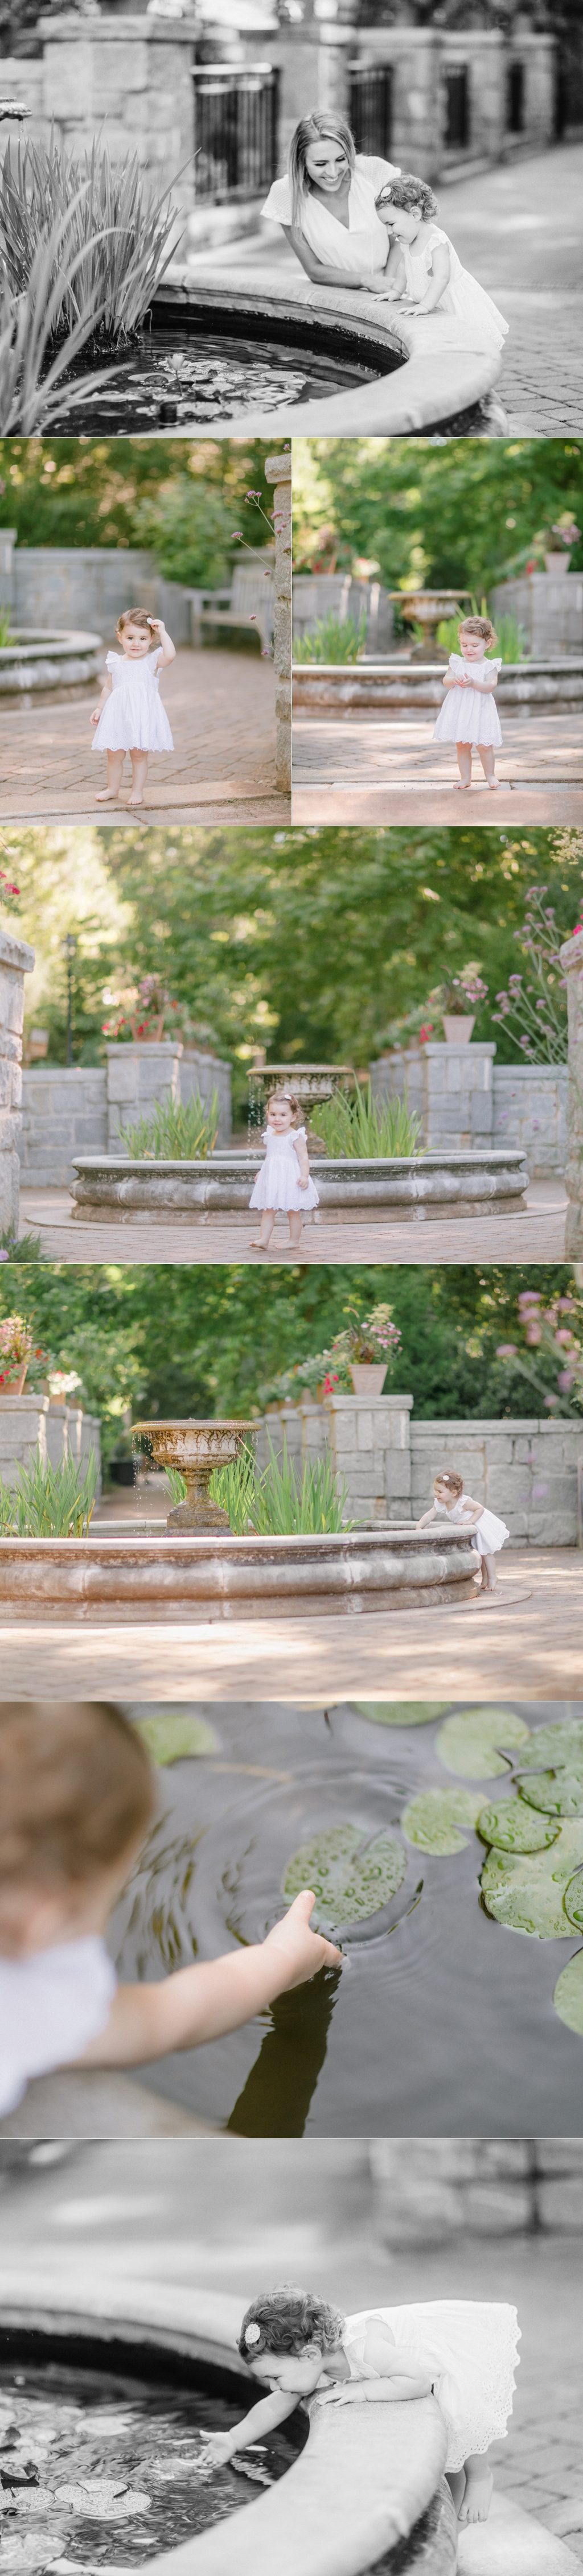 Summer baby portraits in Athens, GA.